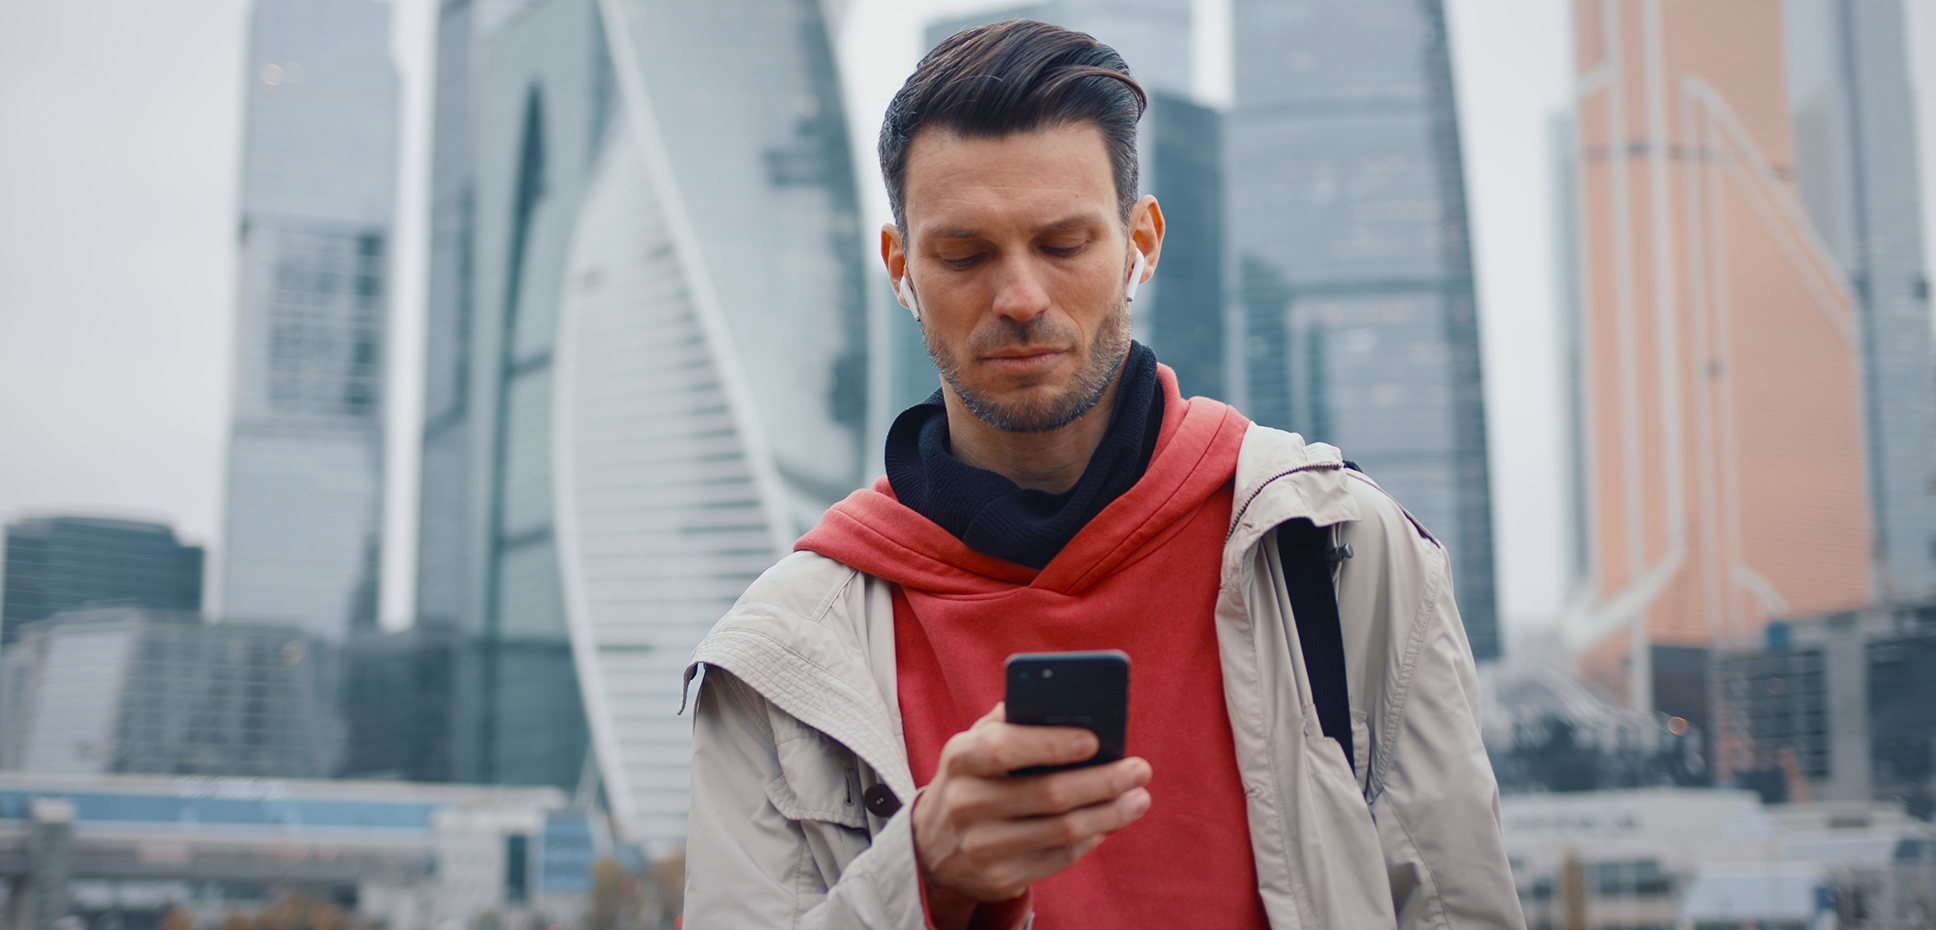 An urban commuter in a red hoodie and earbuds glances at his smartphone